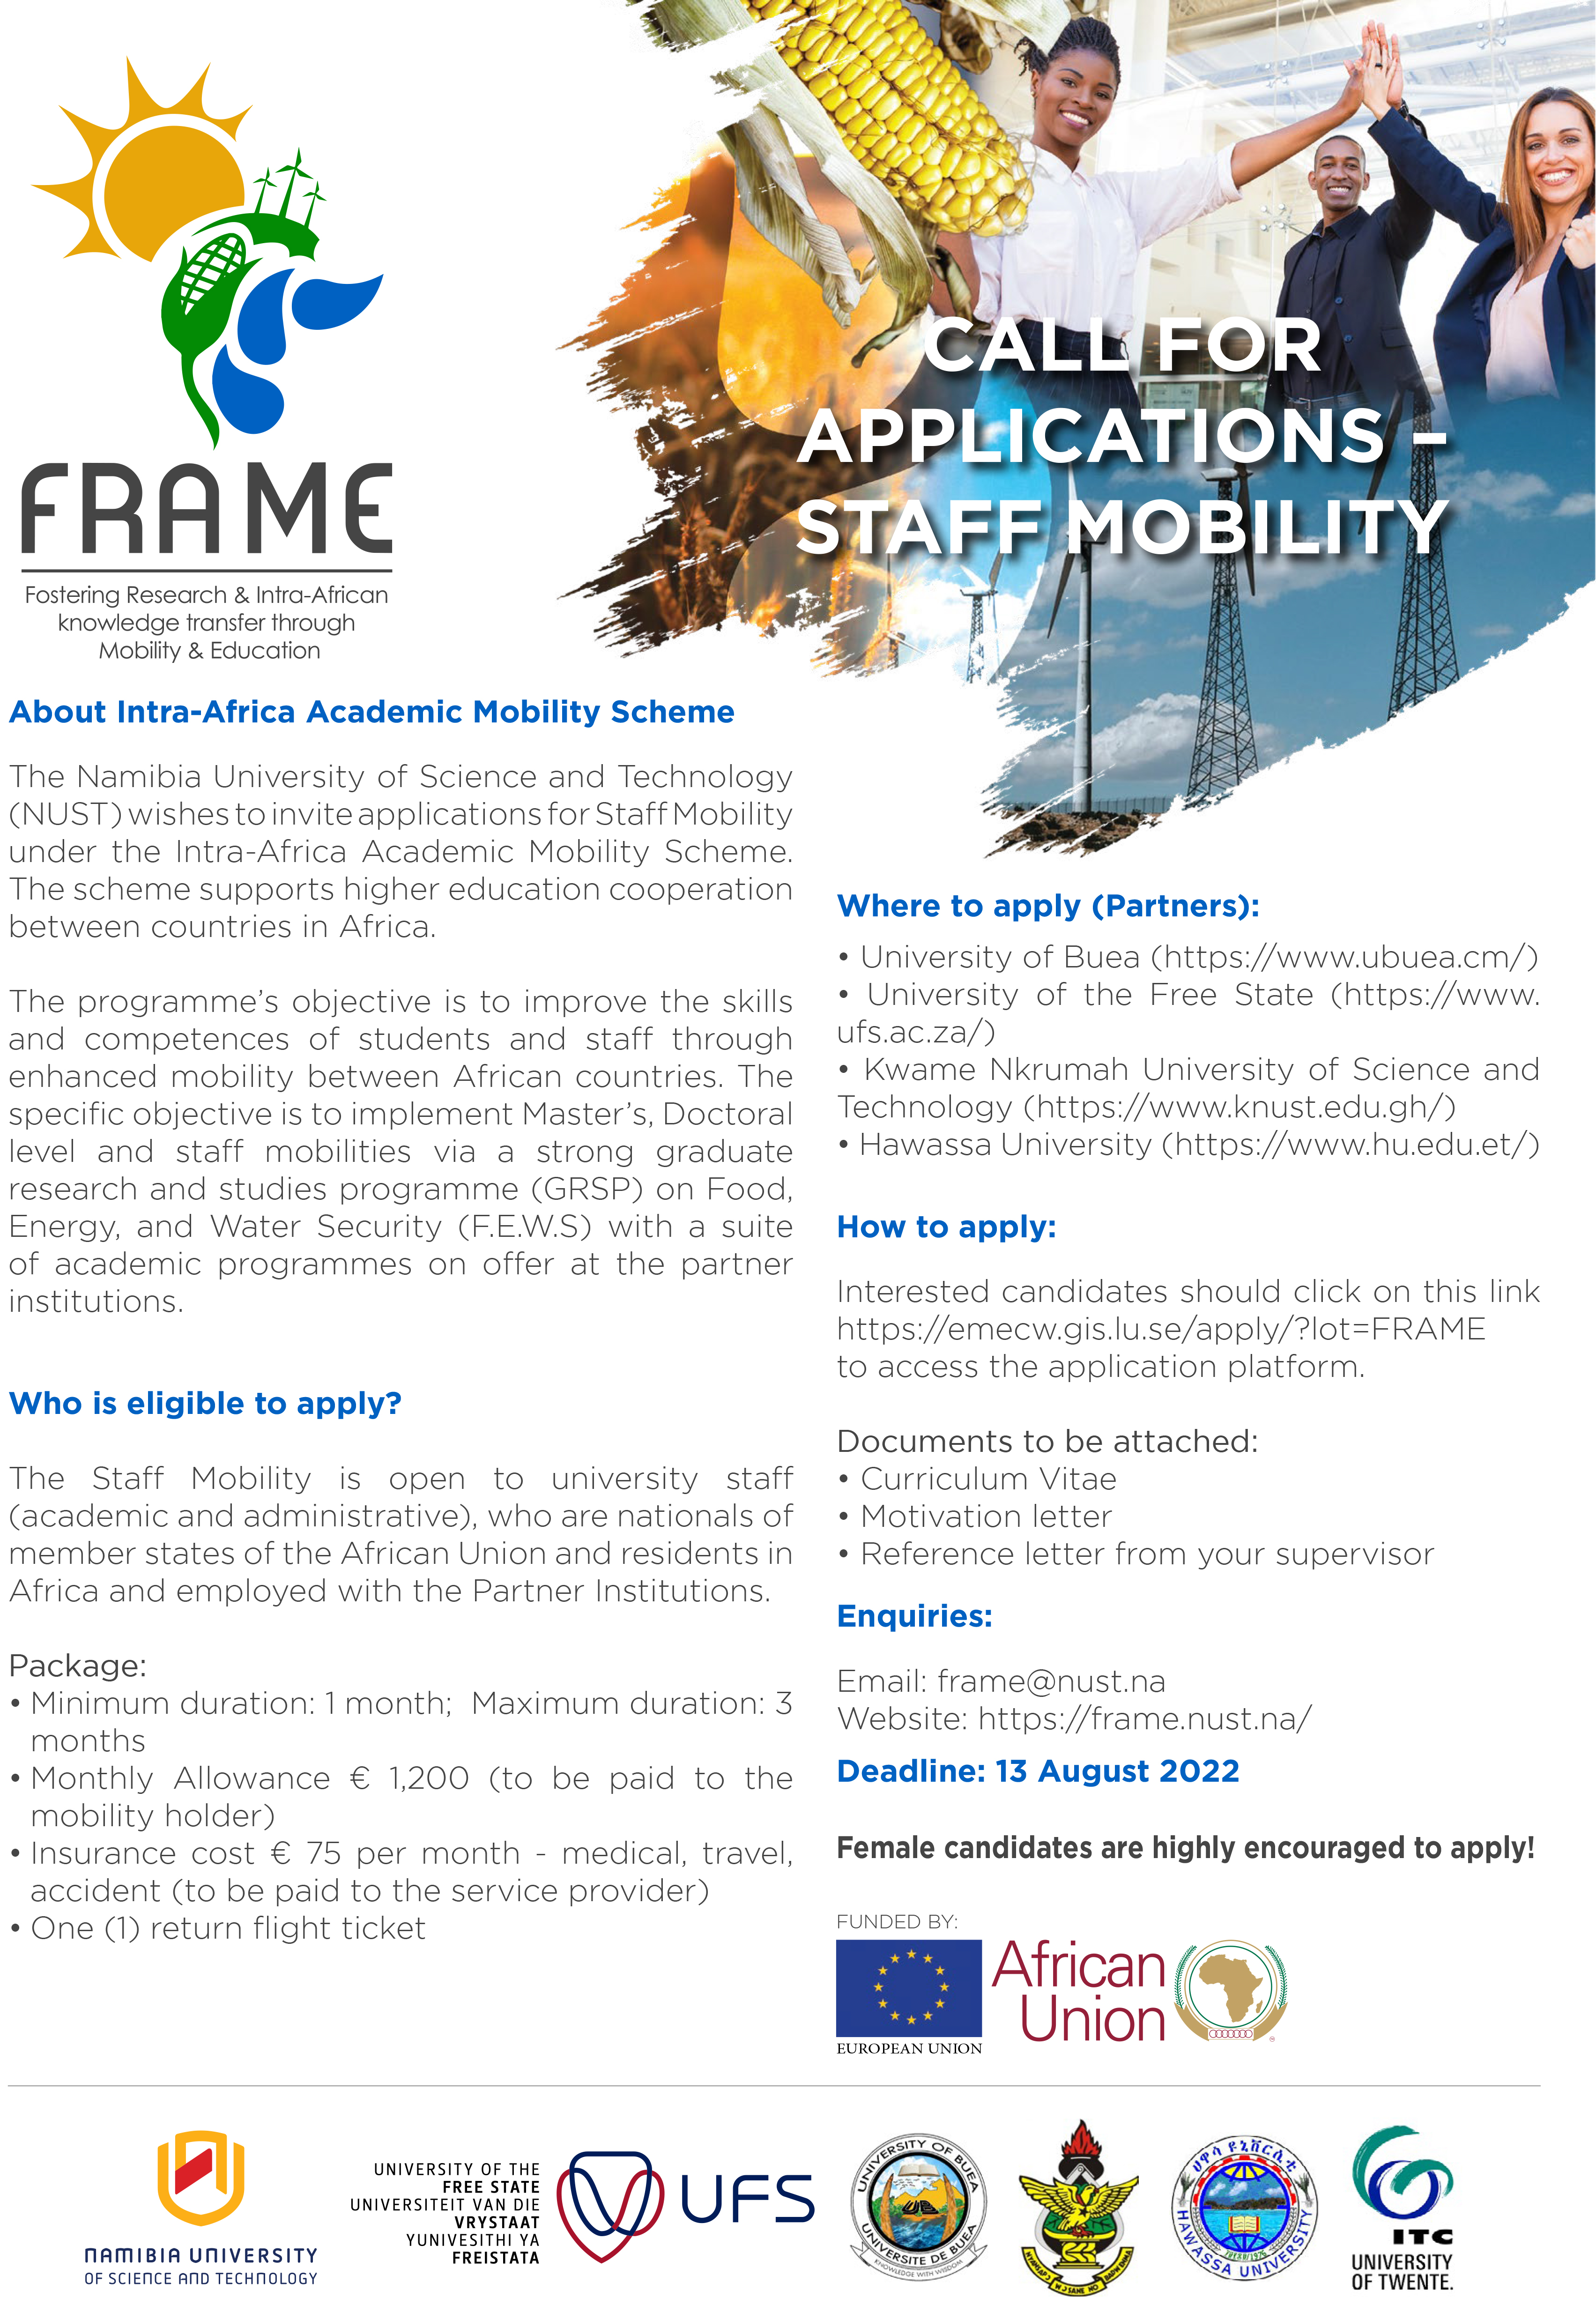 FRAME - Call for Application (Staff Mobility)